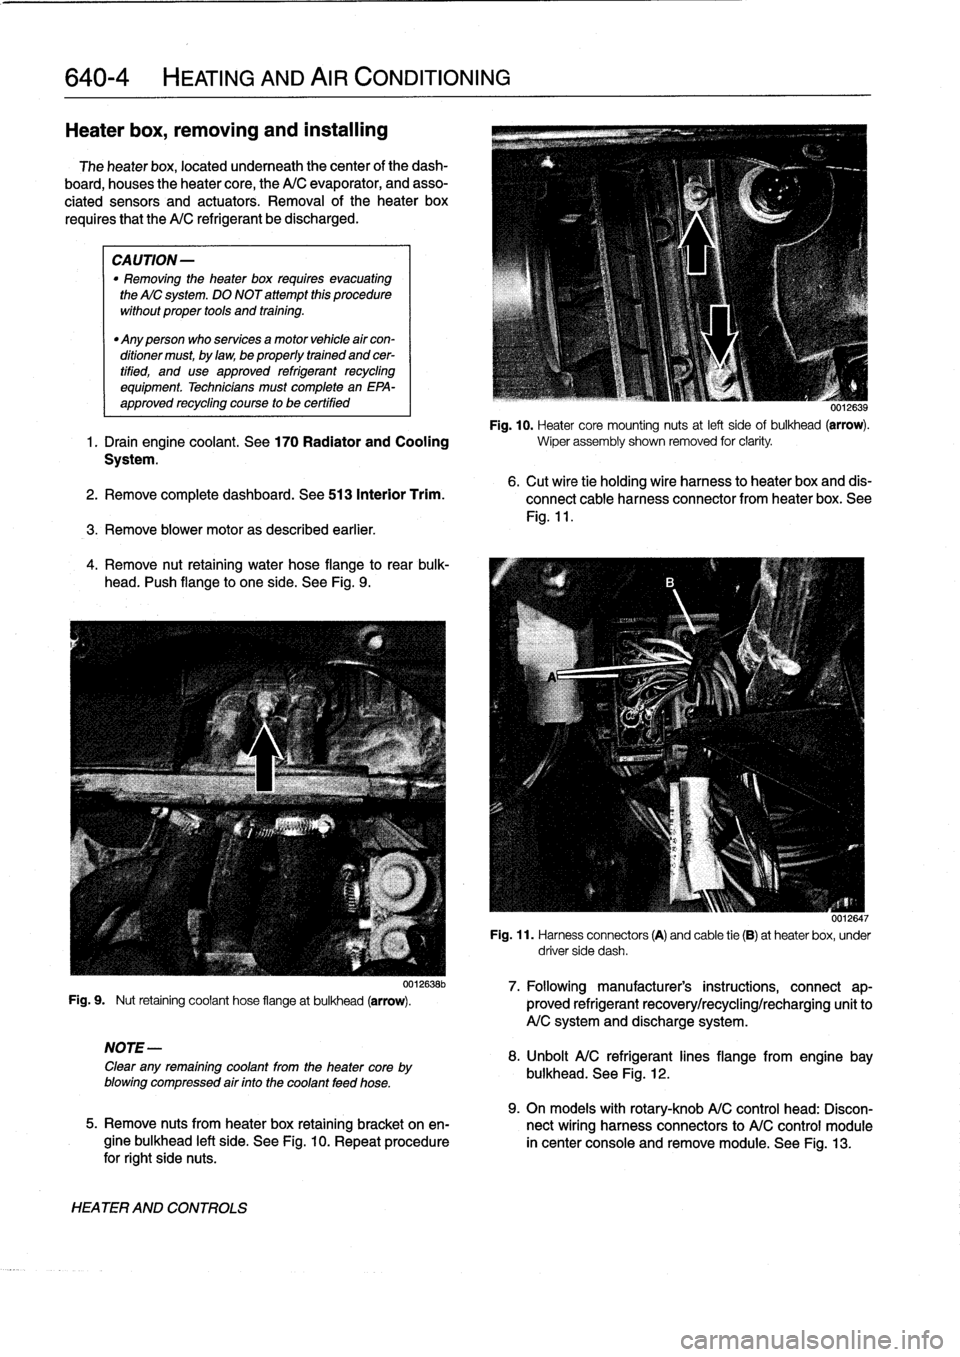 BMW 318i 1997 E36 Owners Manual 
640-4

	

HEATING
AND
AIR
CONDITIONING

Heater
box,
removing
and
installing

The
heater
box,
located
underneath
thecenter
of
the
dash-

board,
houses
theheater
core,
the
A/C
evaporator,
and
asso-

ci